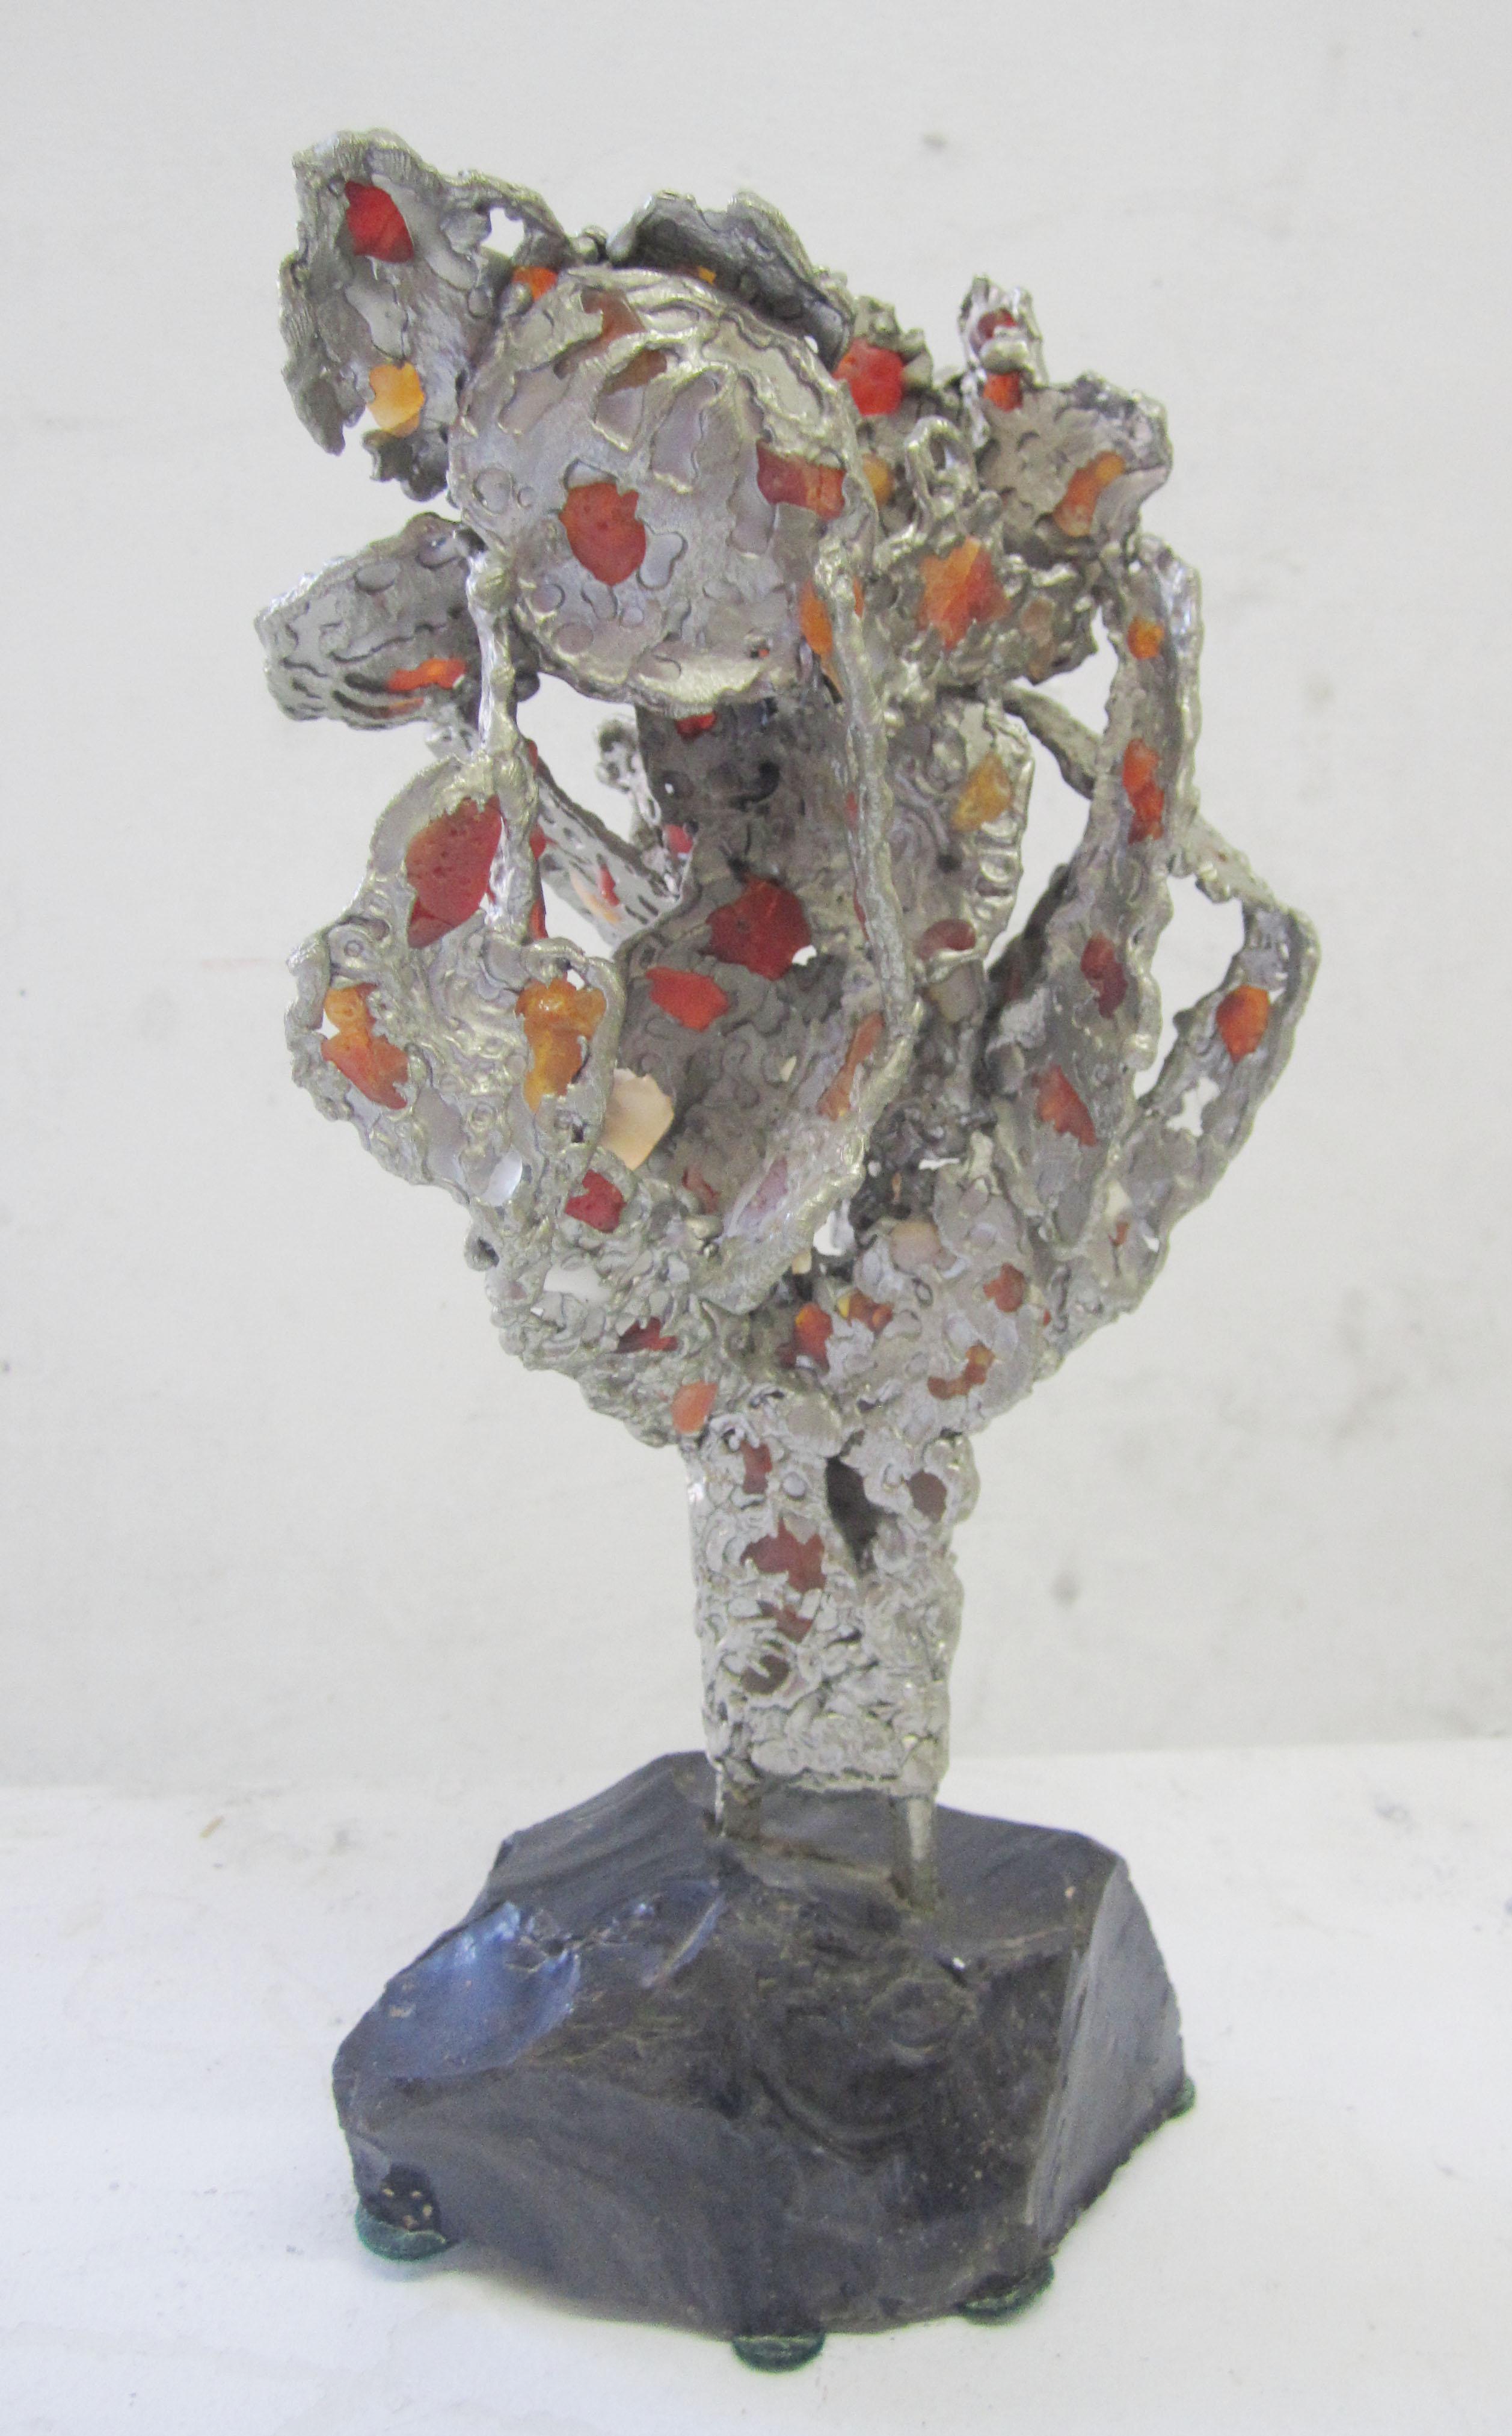 Abstract lead sculpture with agate inserts on an obsidian base.